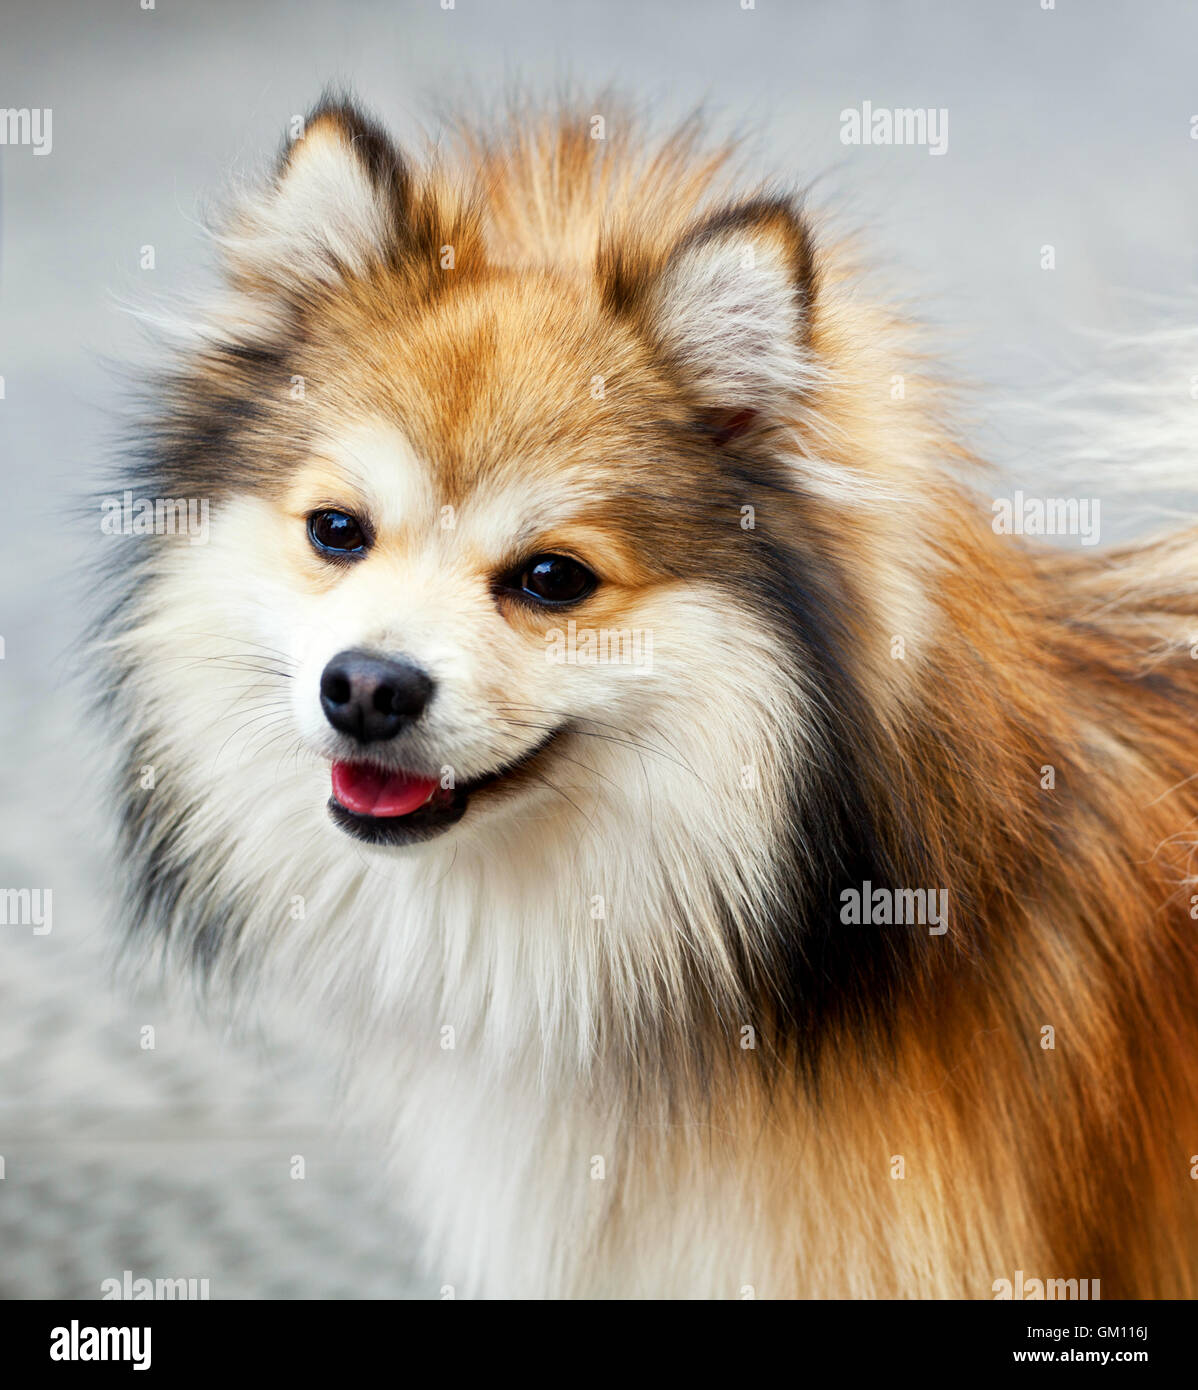 Portrait of a Pomeranian dog with funny smile. Stock Photo